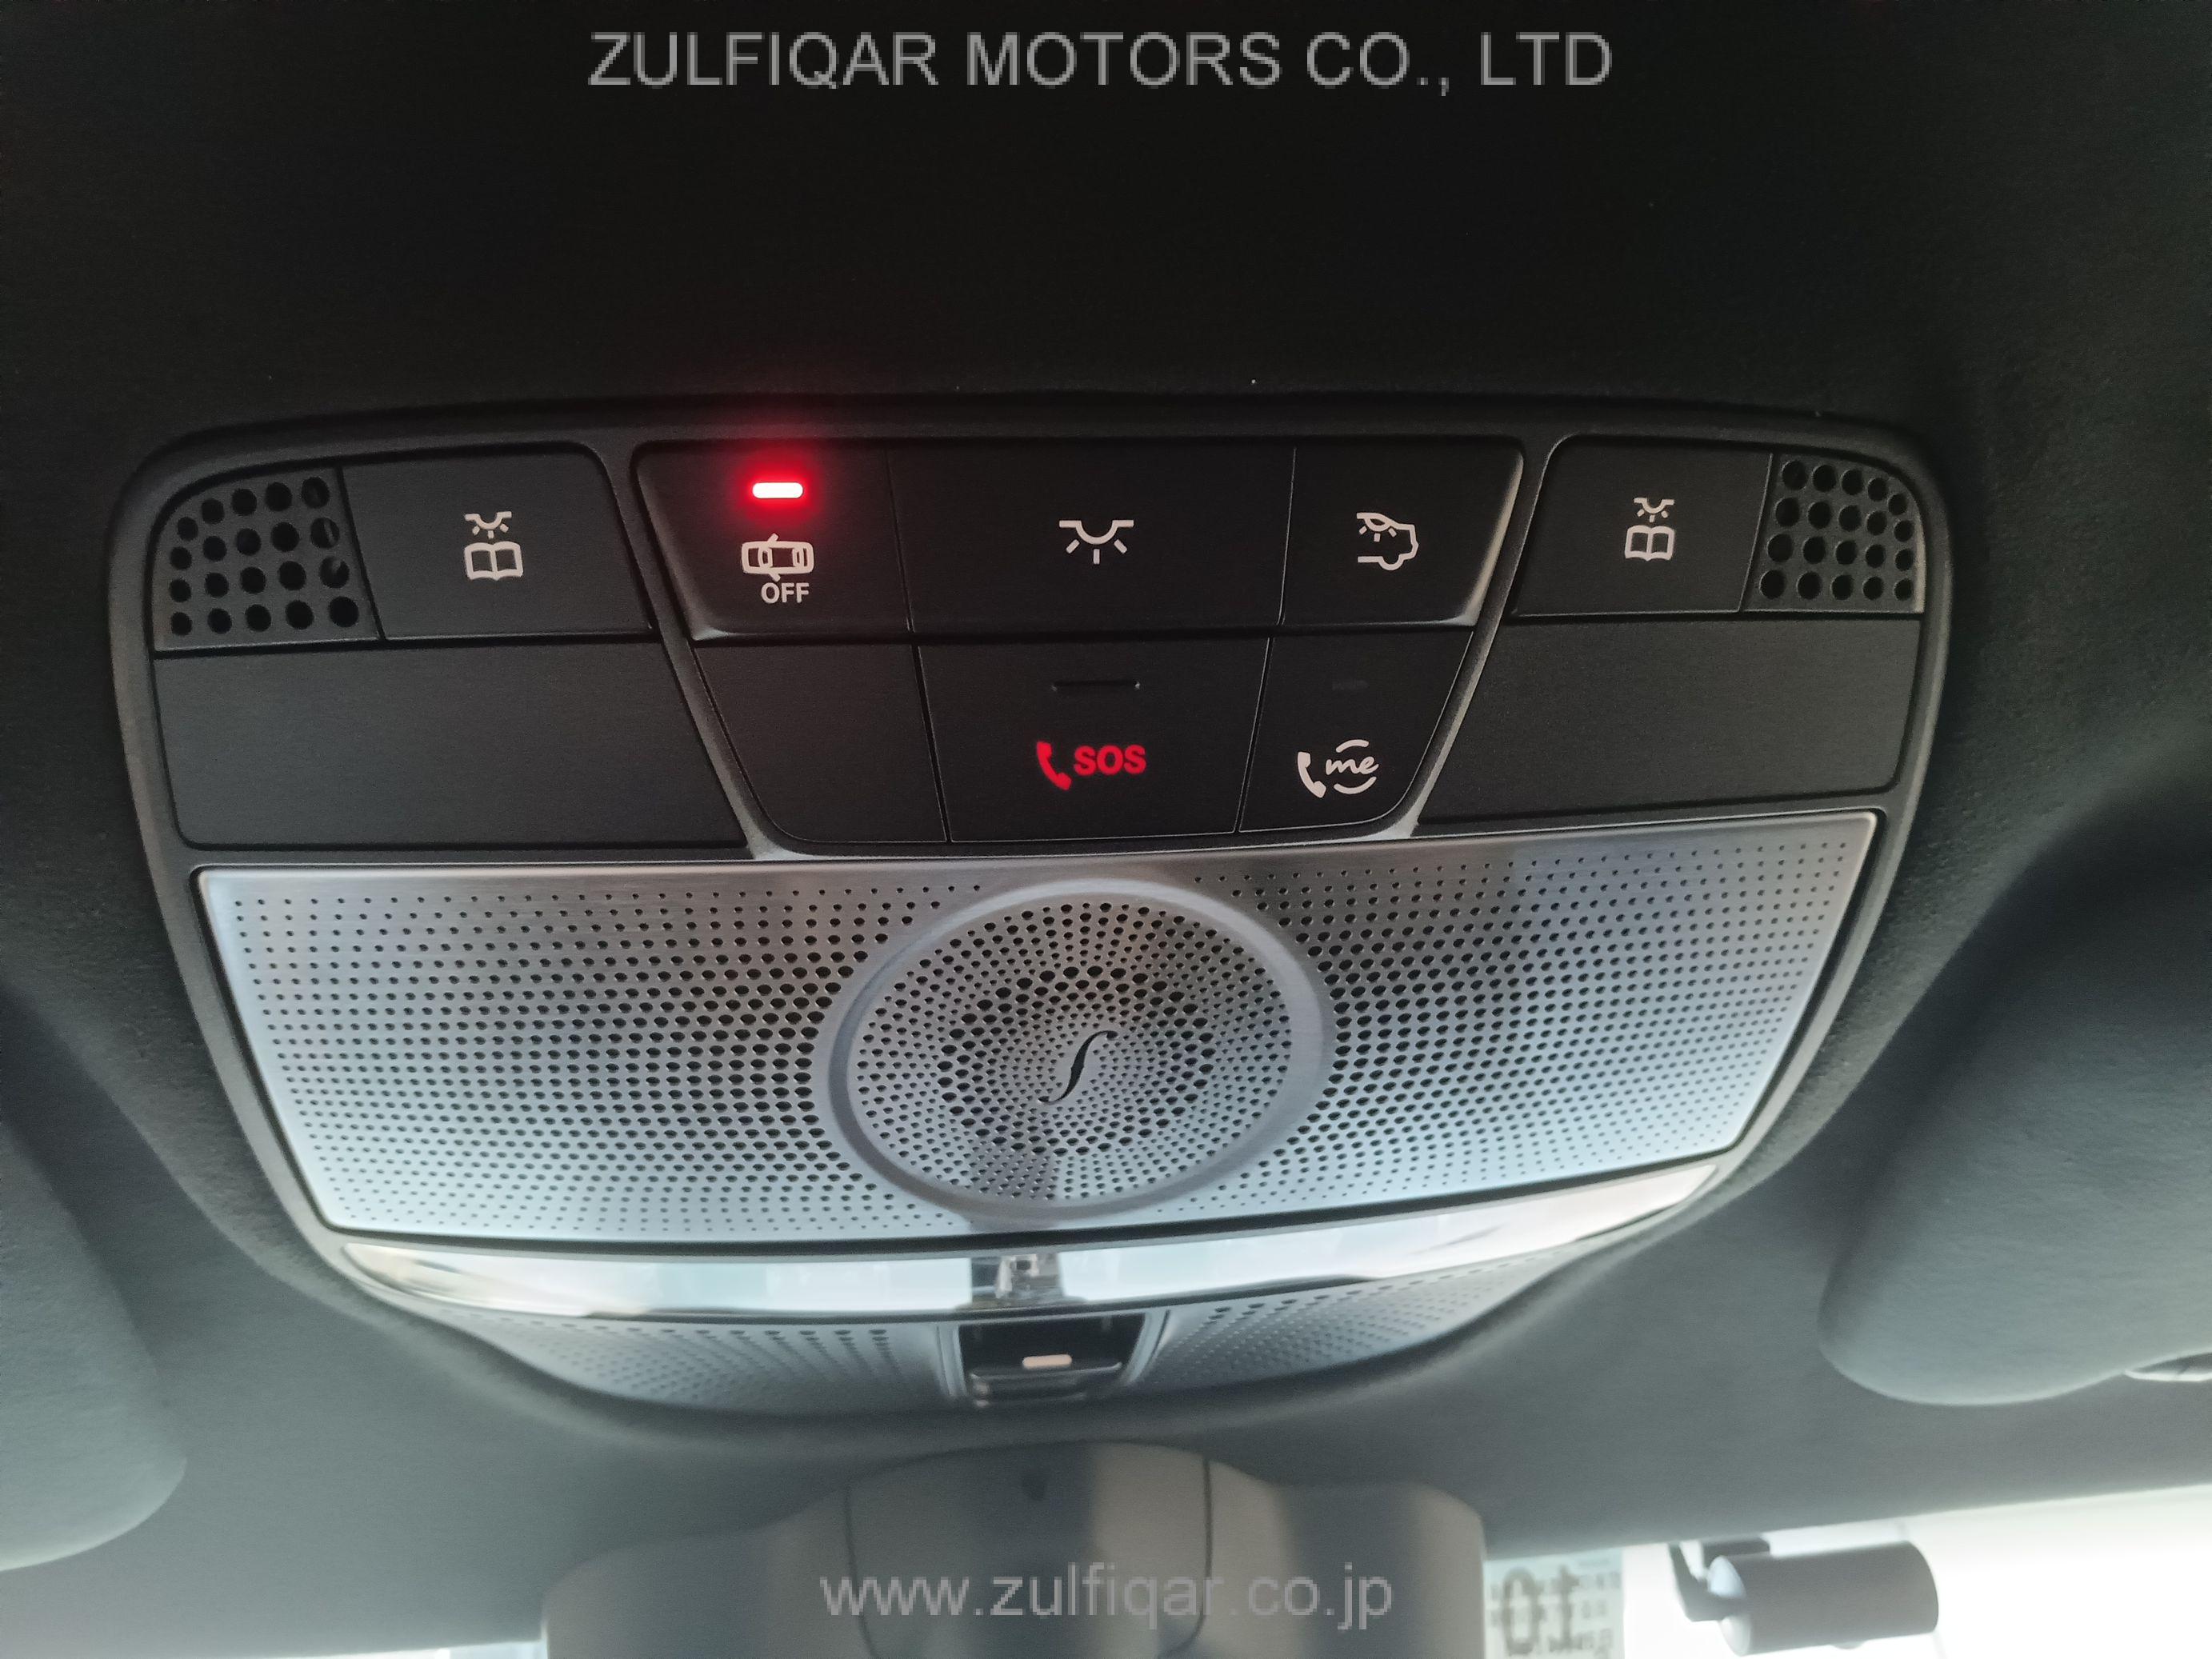 MERCEDES AMG G CLASS 2021 Image 74